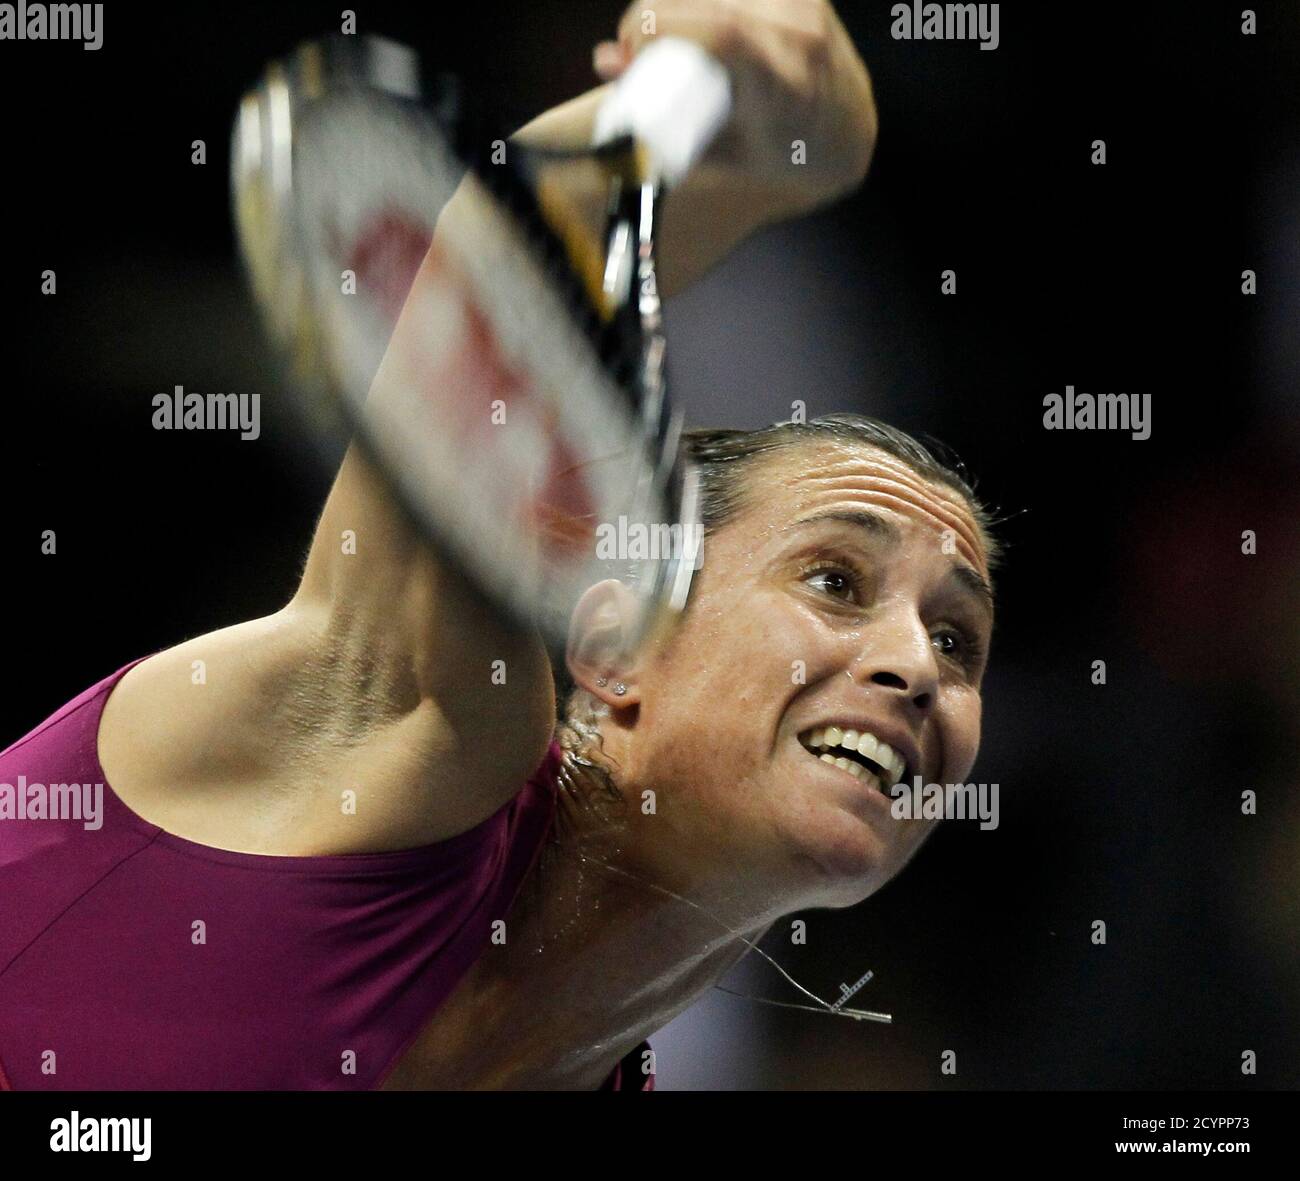 Flavia Pennetta of Italy serves to CoCo Vandeweghe of the U.S.during their fourth round  tennis match of the Fed Cup final in San Diego, California November 7, 2010.   REUTERS/Mike Blake  (UNITED STATES - Tags: SPORT TENNIS) Stock Photo